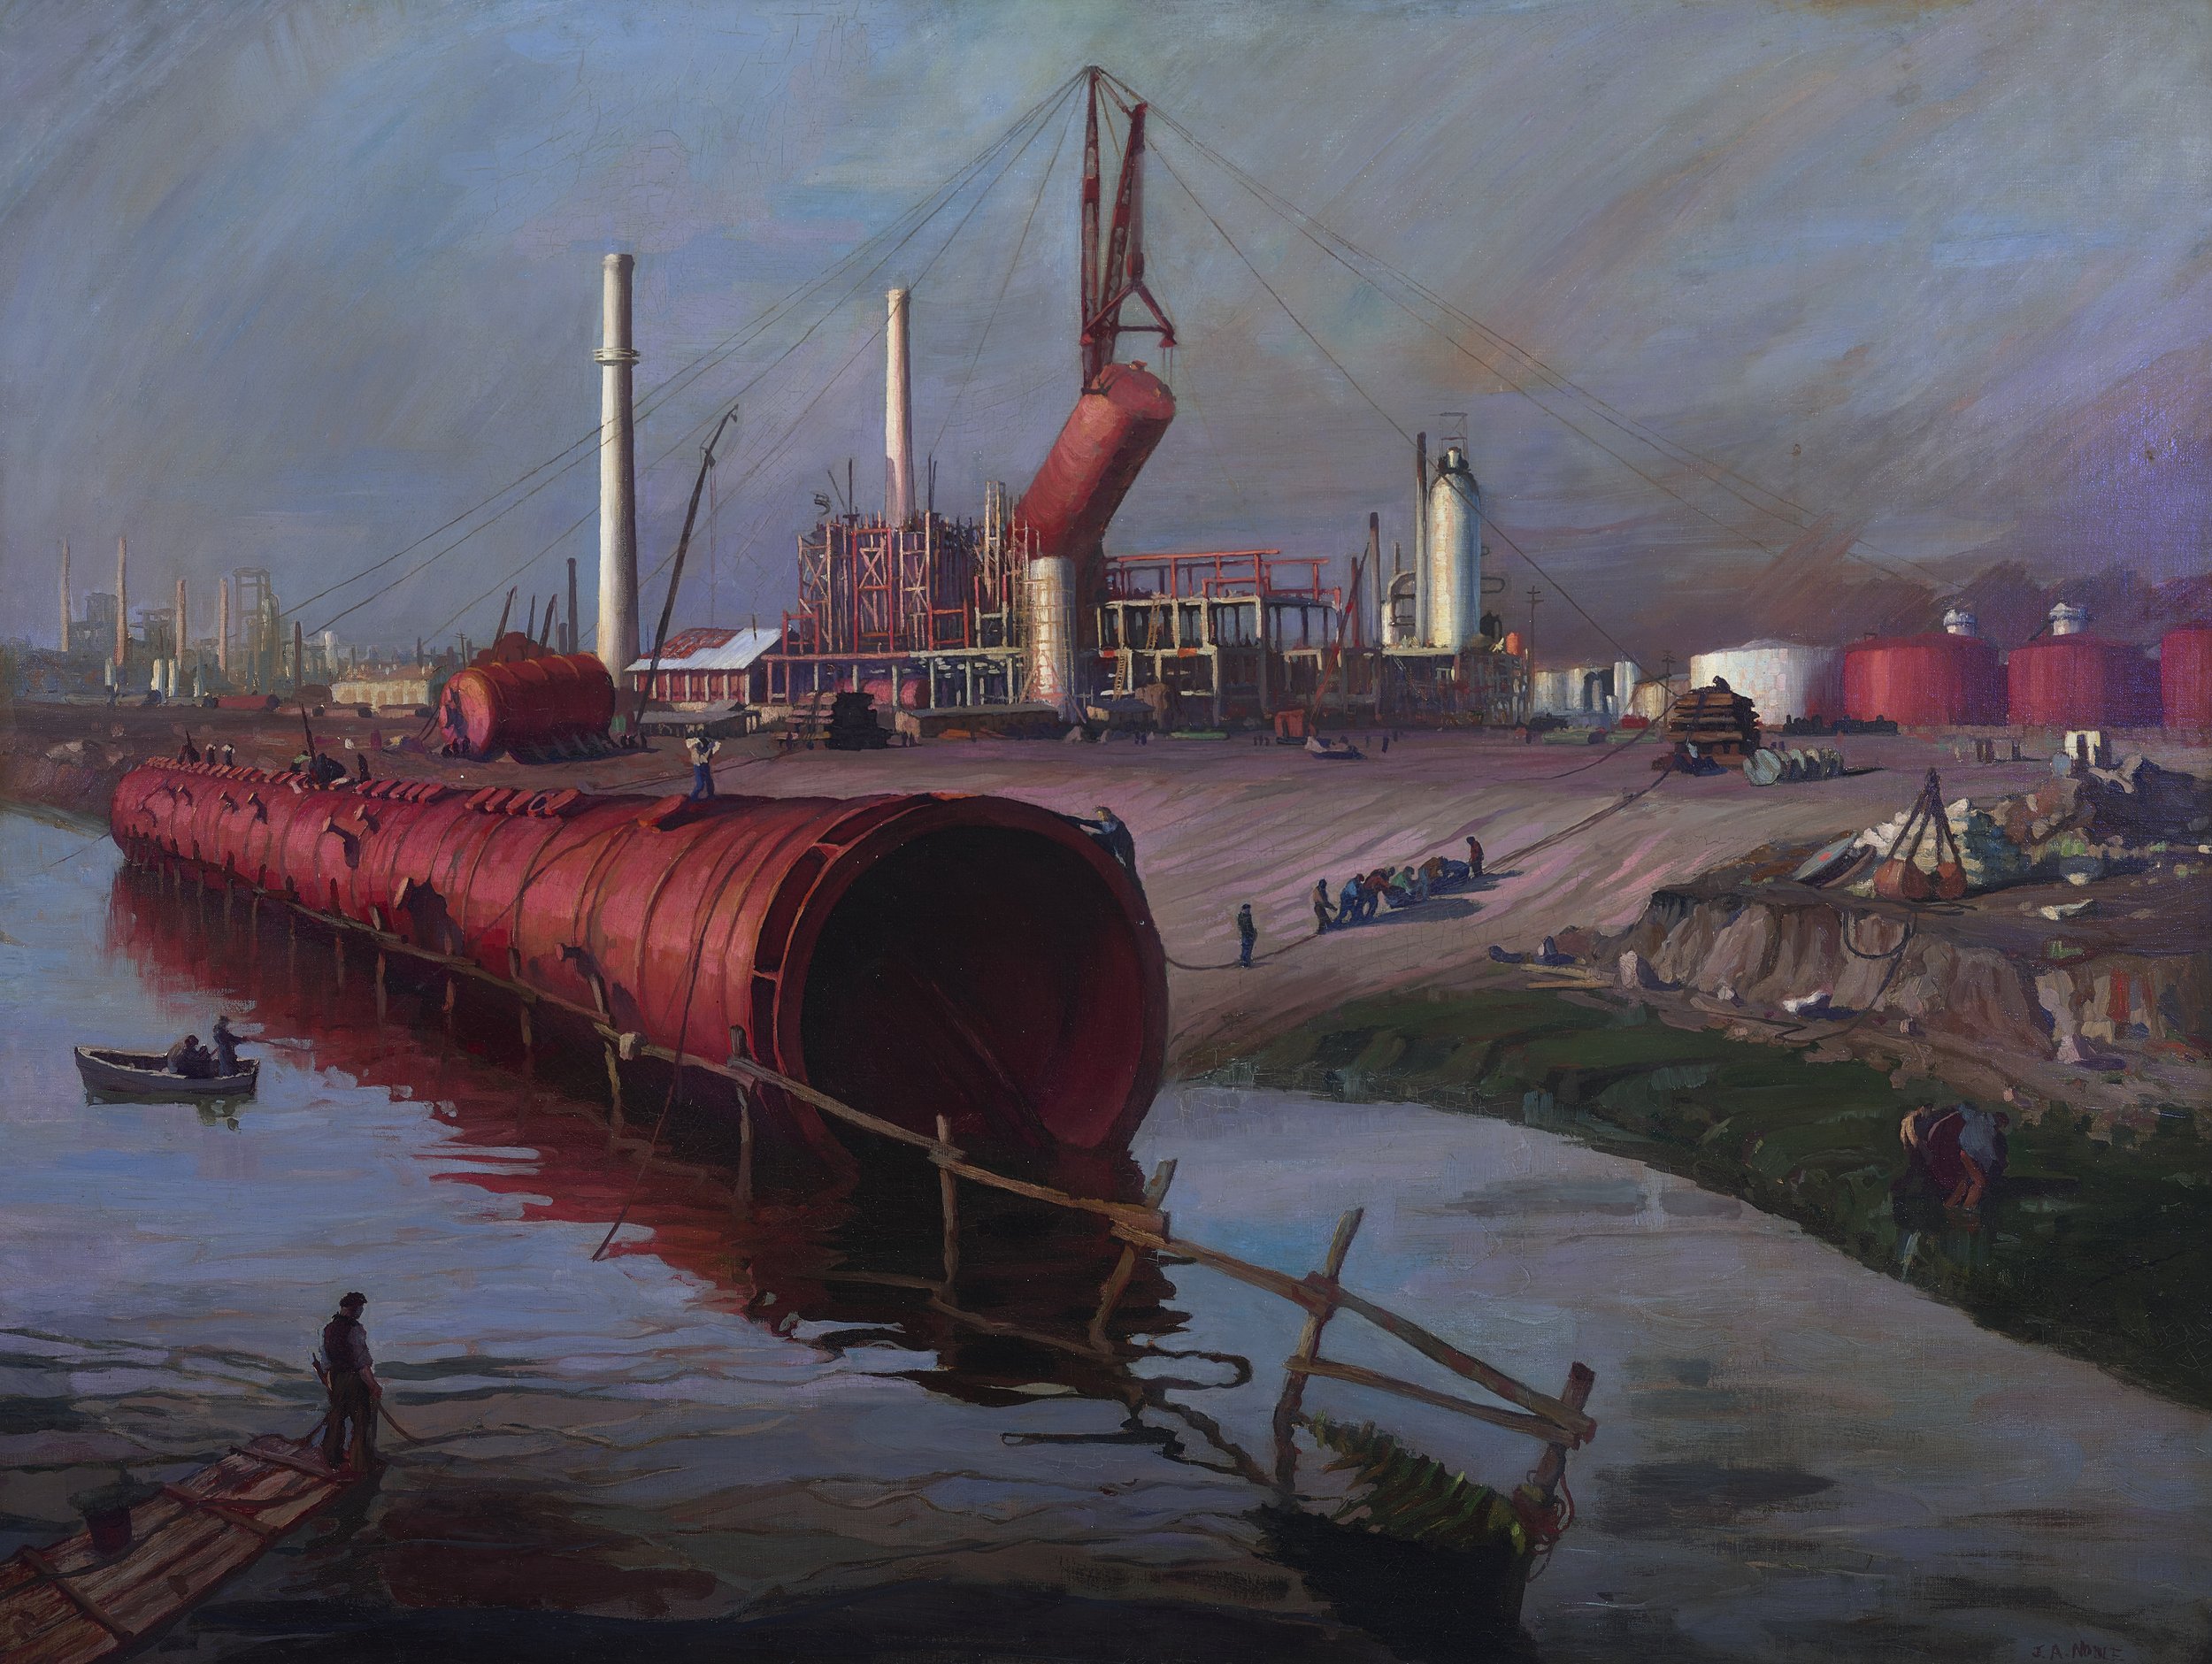 John A. Noble (1913-1983), The Building of Tidewater, Oil on canvas, c. 1937